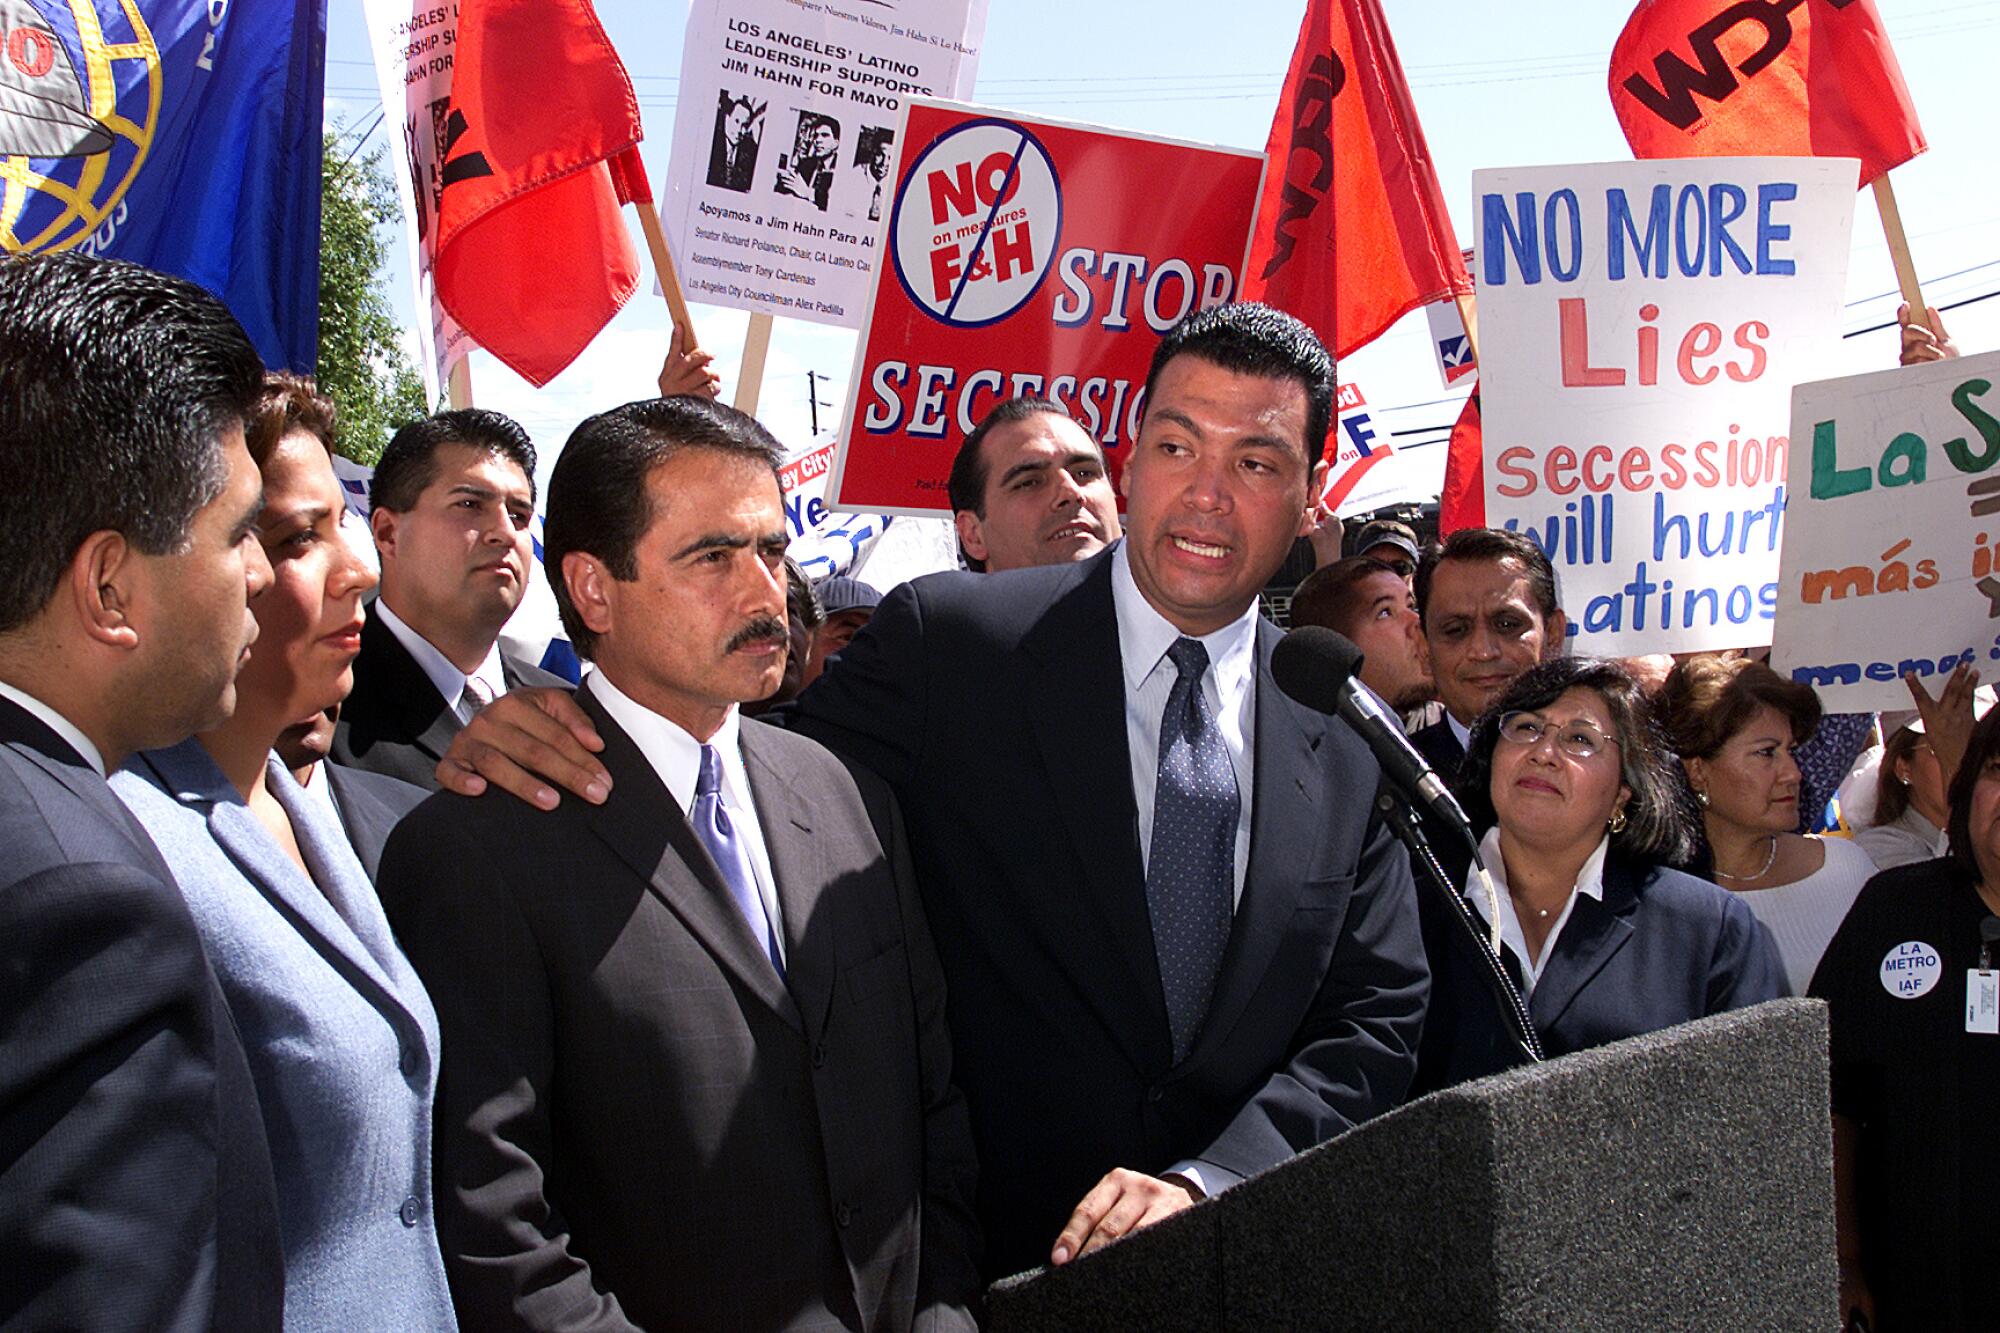 A news conference was held by Latino leaders at Fire Station 75 in Mission Hills. 